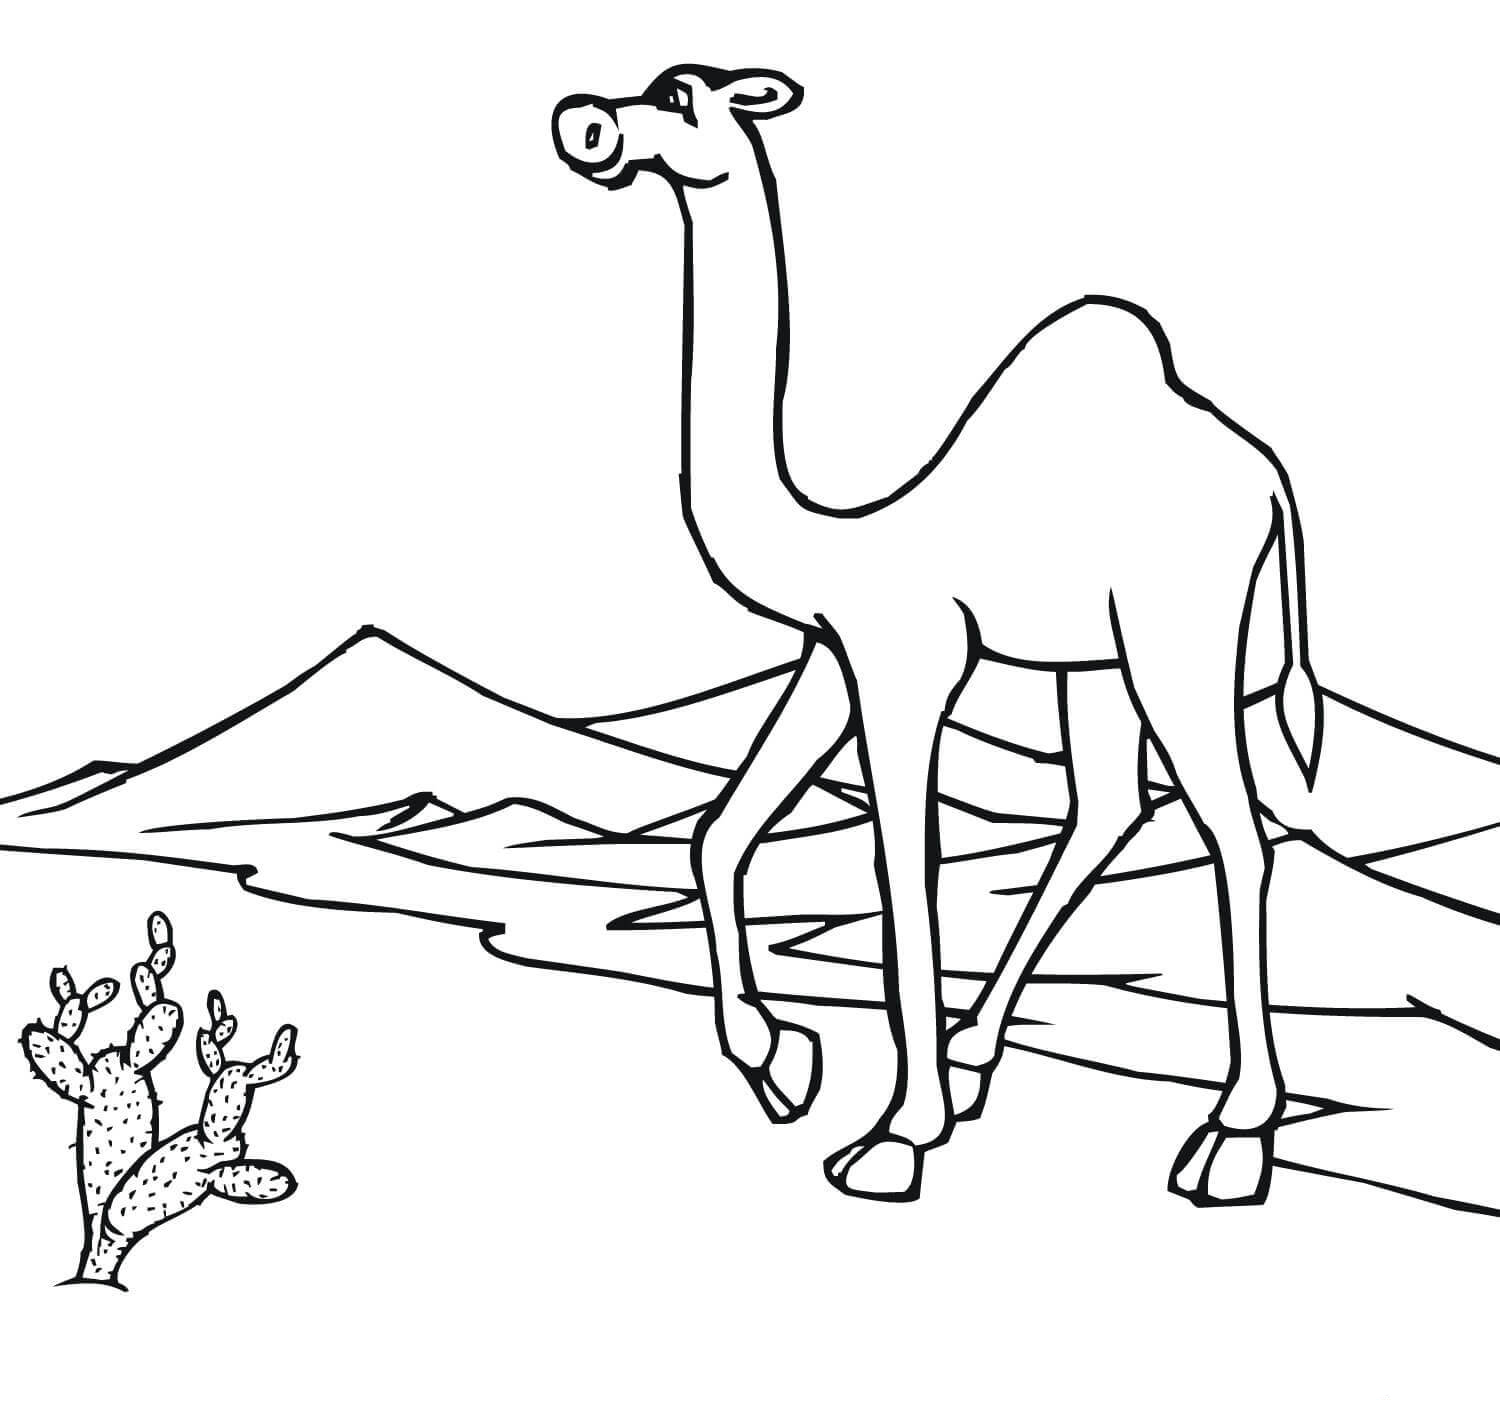 Download Desert Coloring Pages - Best Coloring Pages For Kids